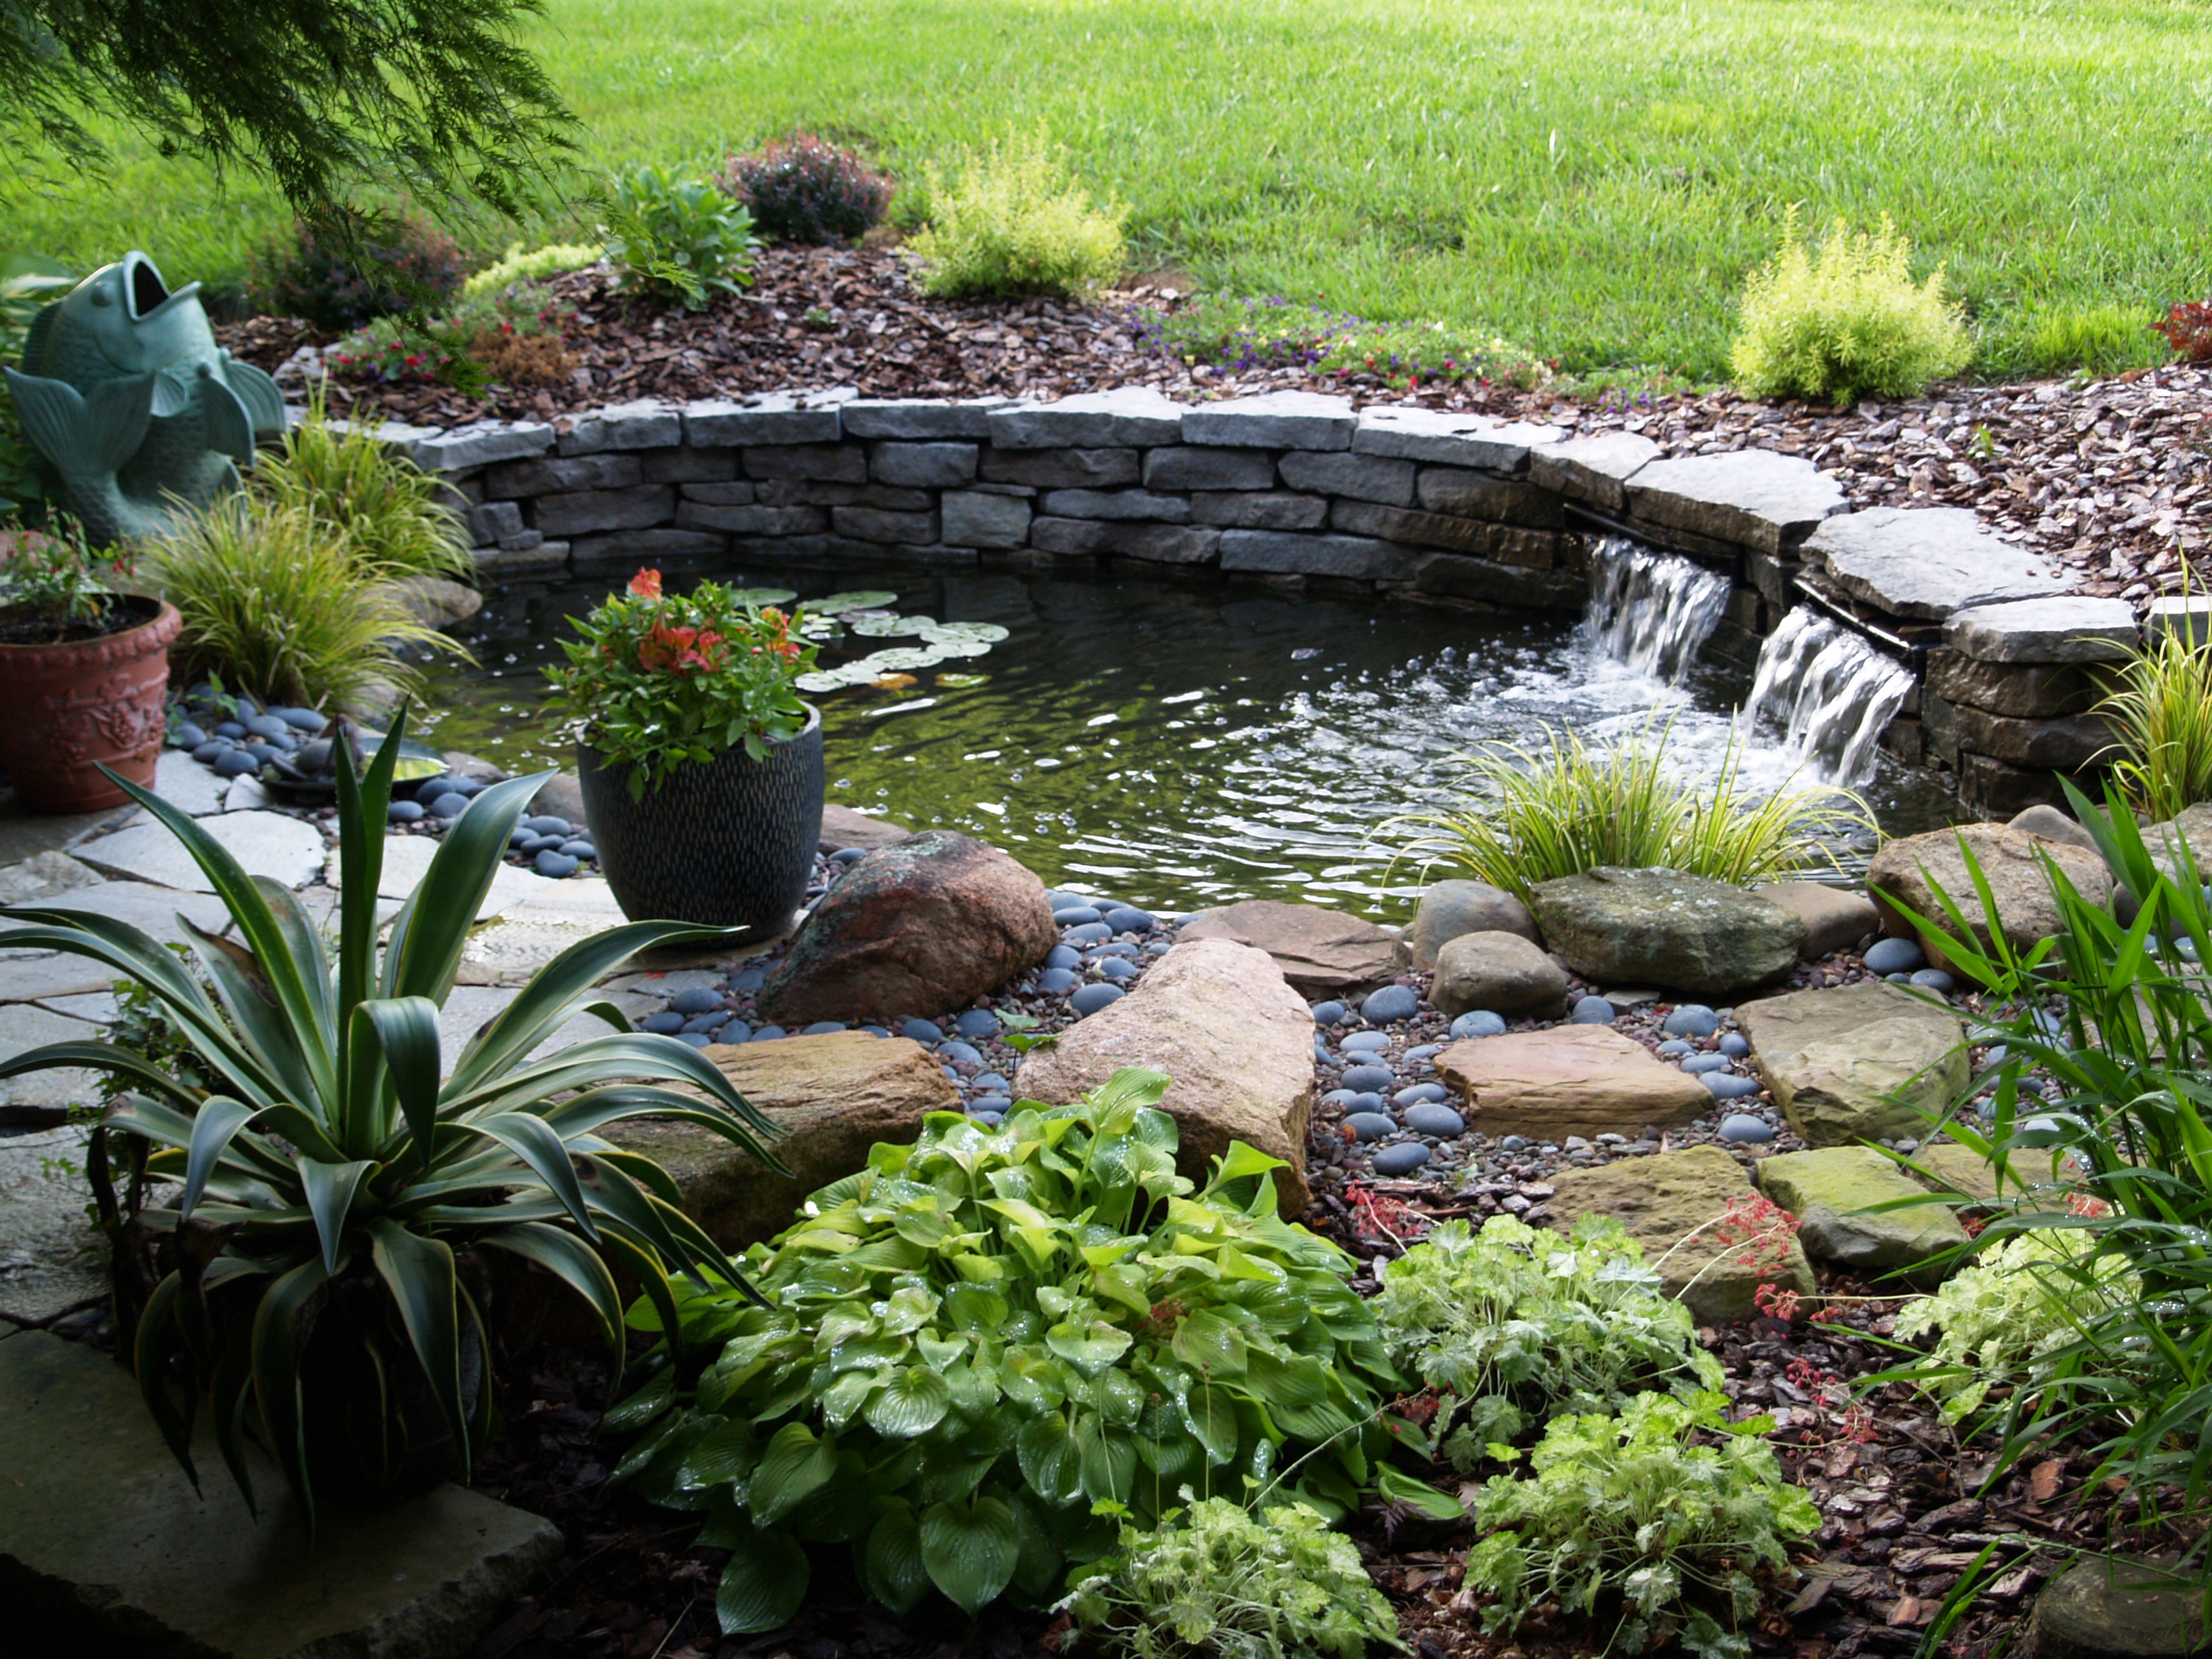 How To Build A Raised Pond In Your Garden - ClickHowTo